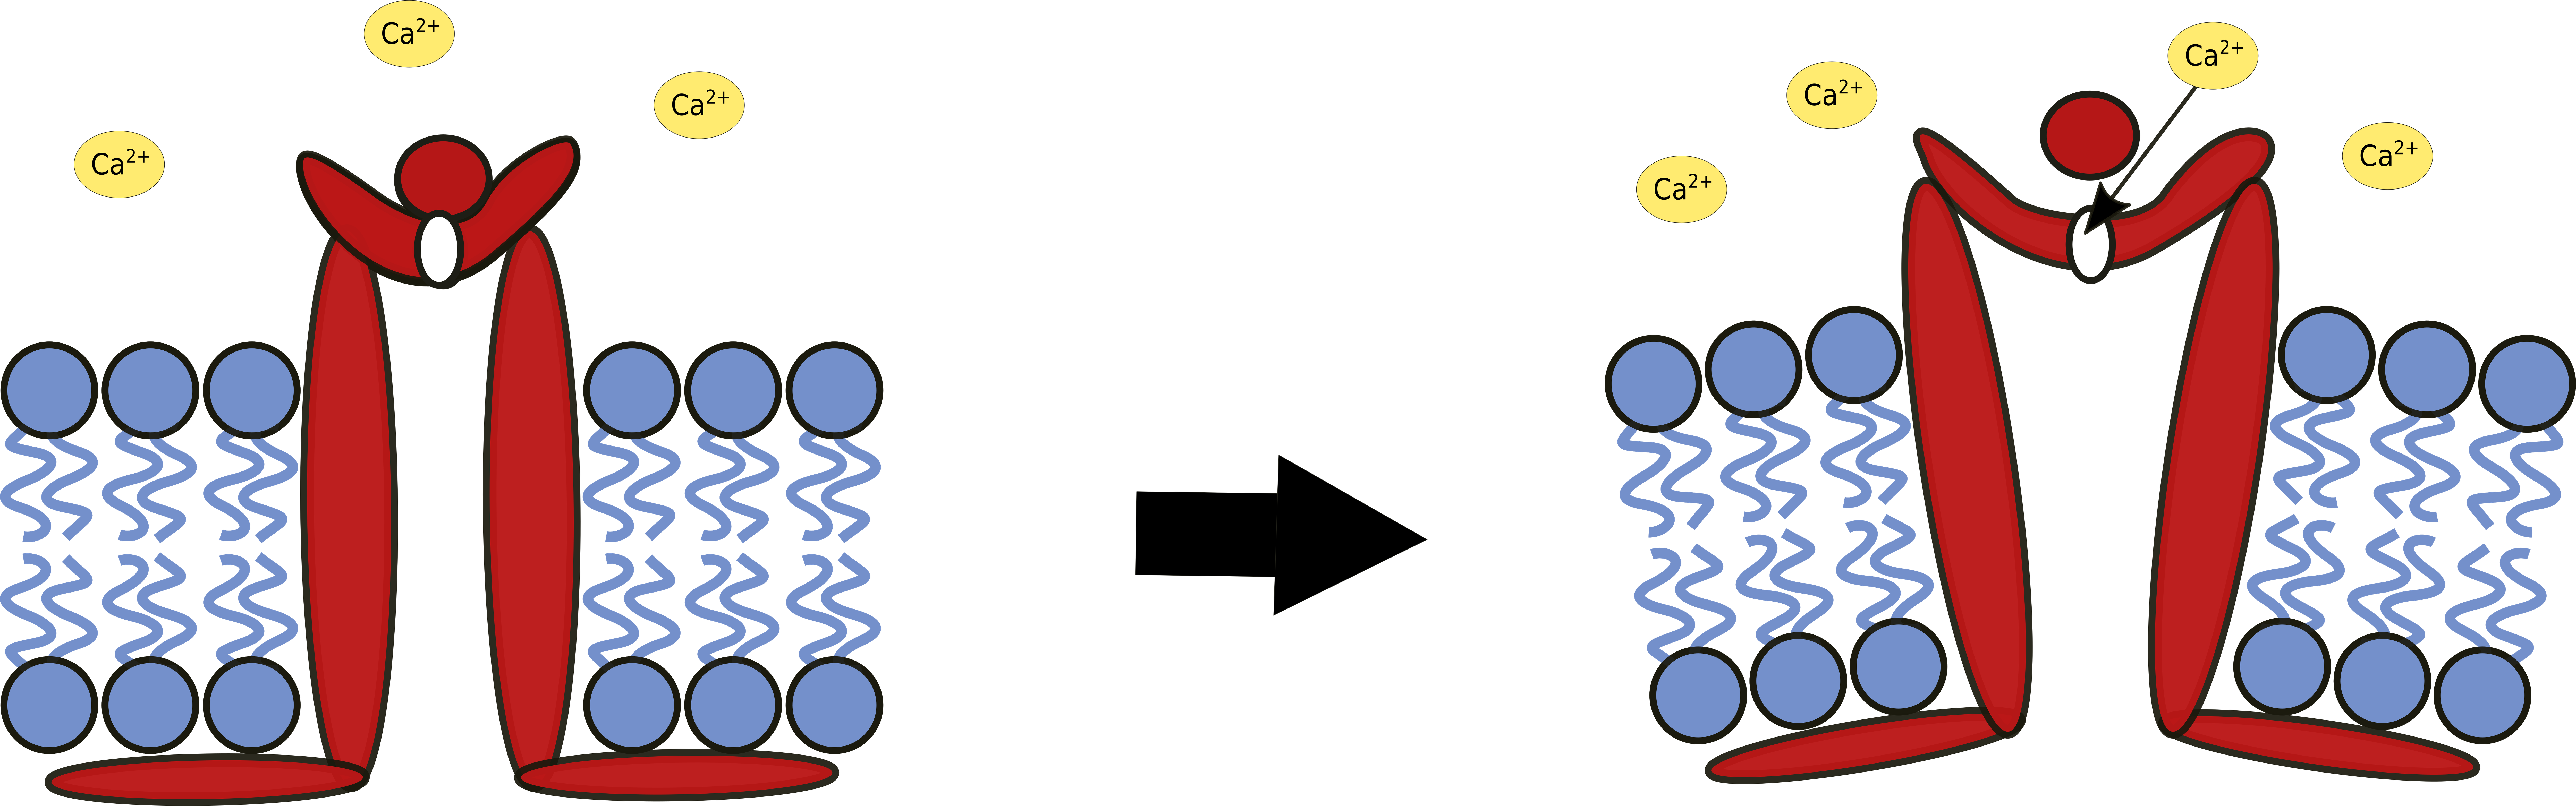 cartoon image of a mechanoreceptive ion channel in closed and open conformation